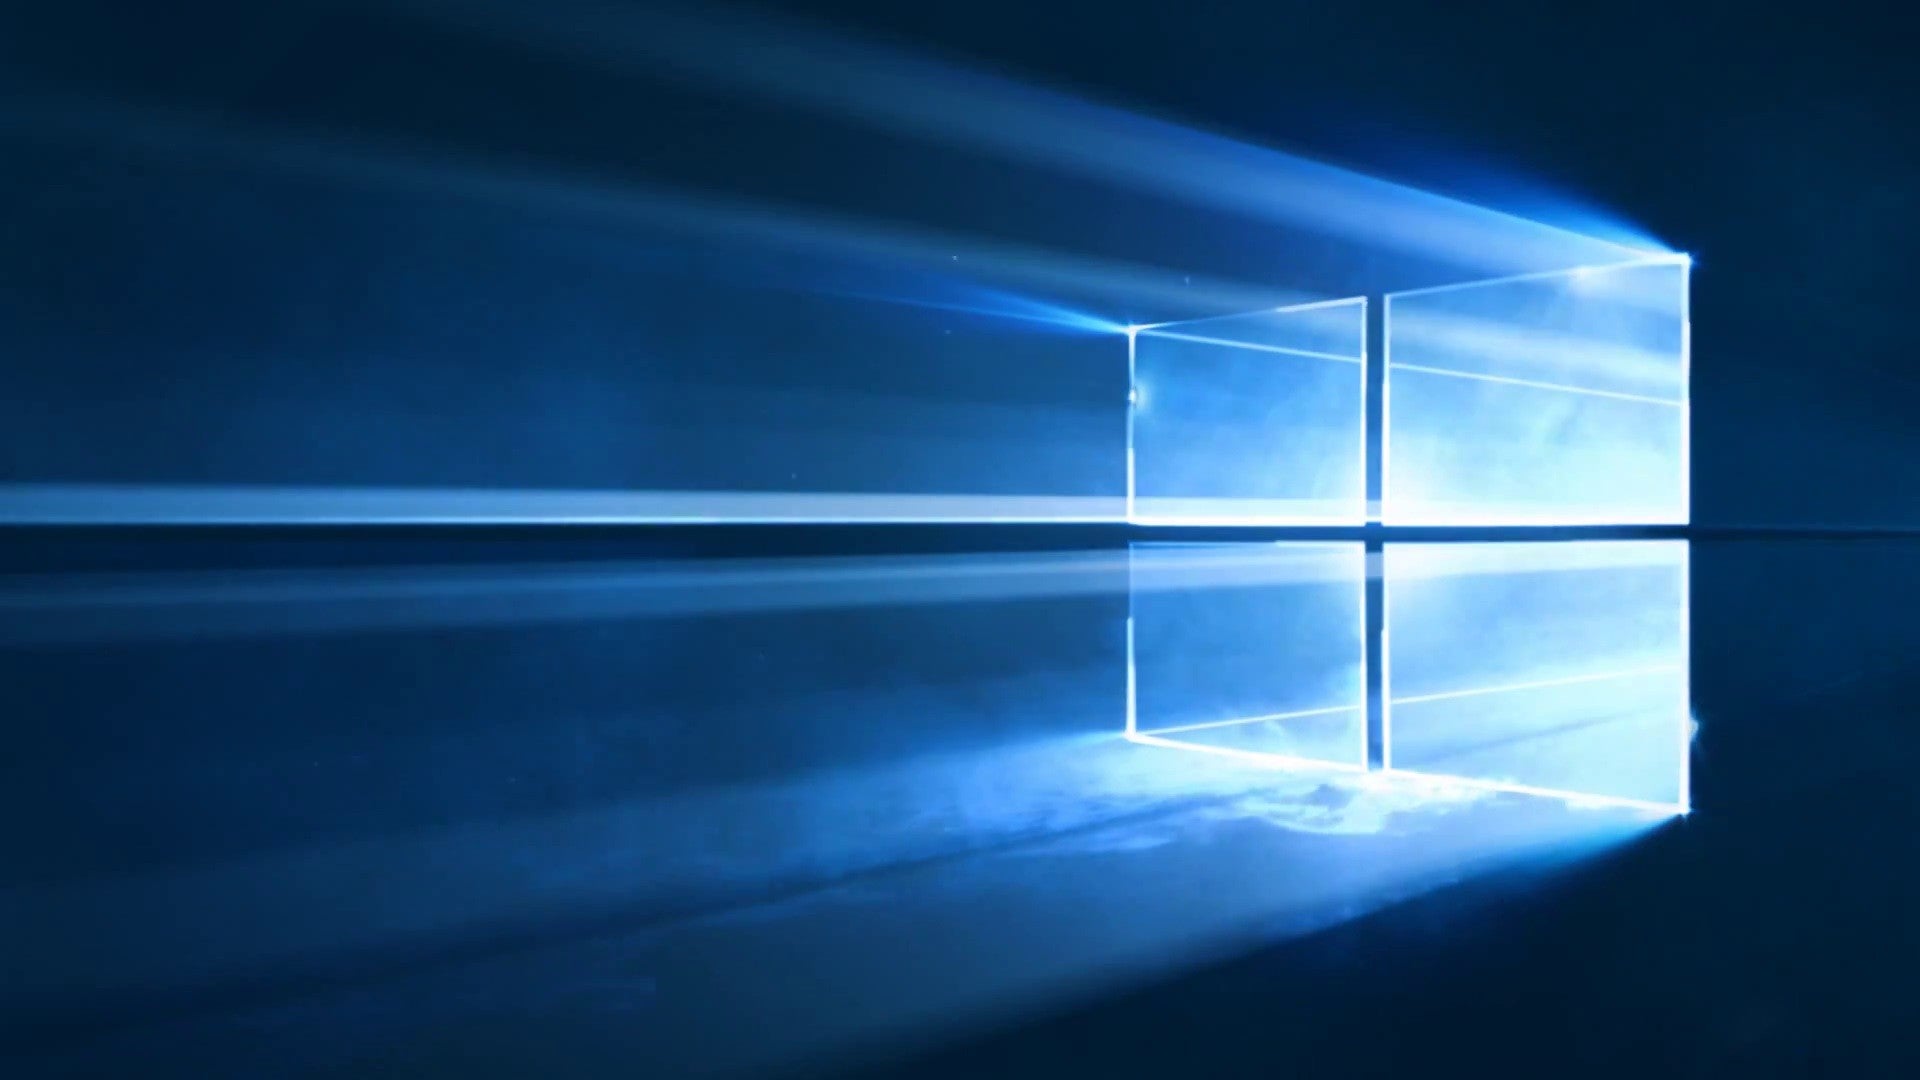 How Microsoft Tricked Me Into Installing Windows 10